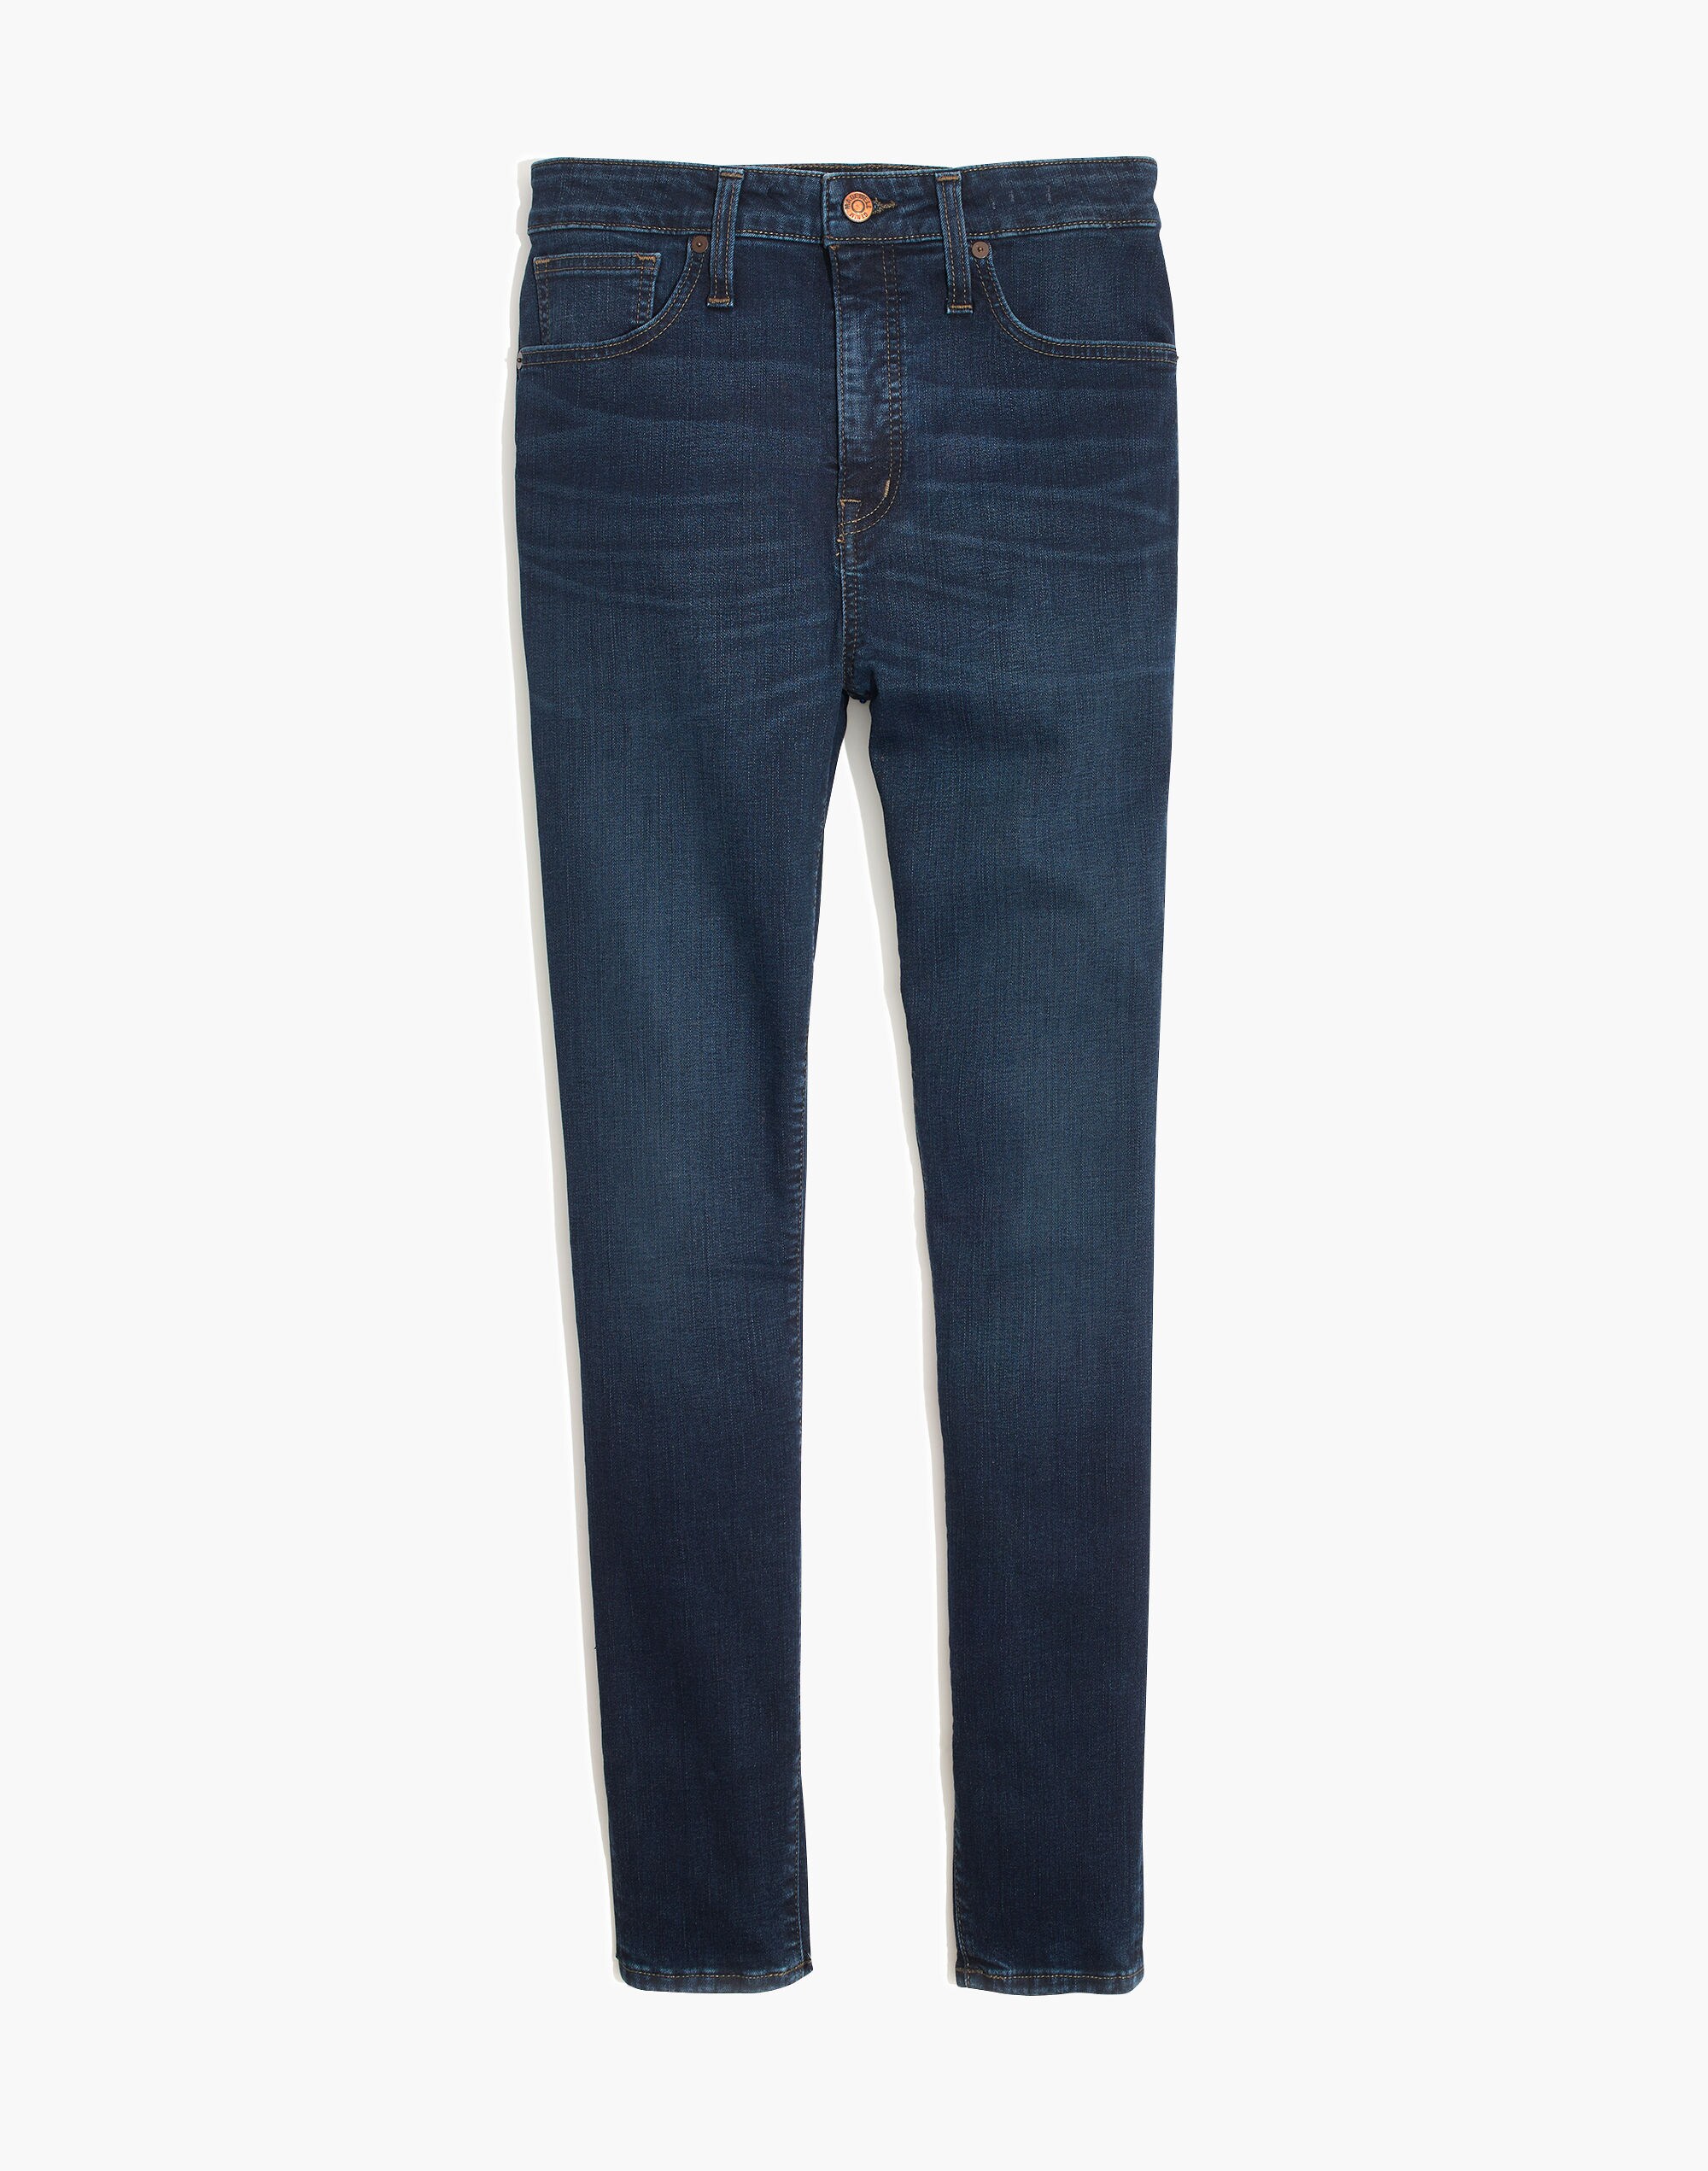 Women's Curvy High-Rise Skinny Jeans in Hayes Wash